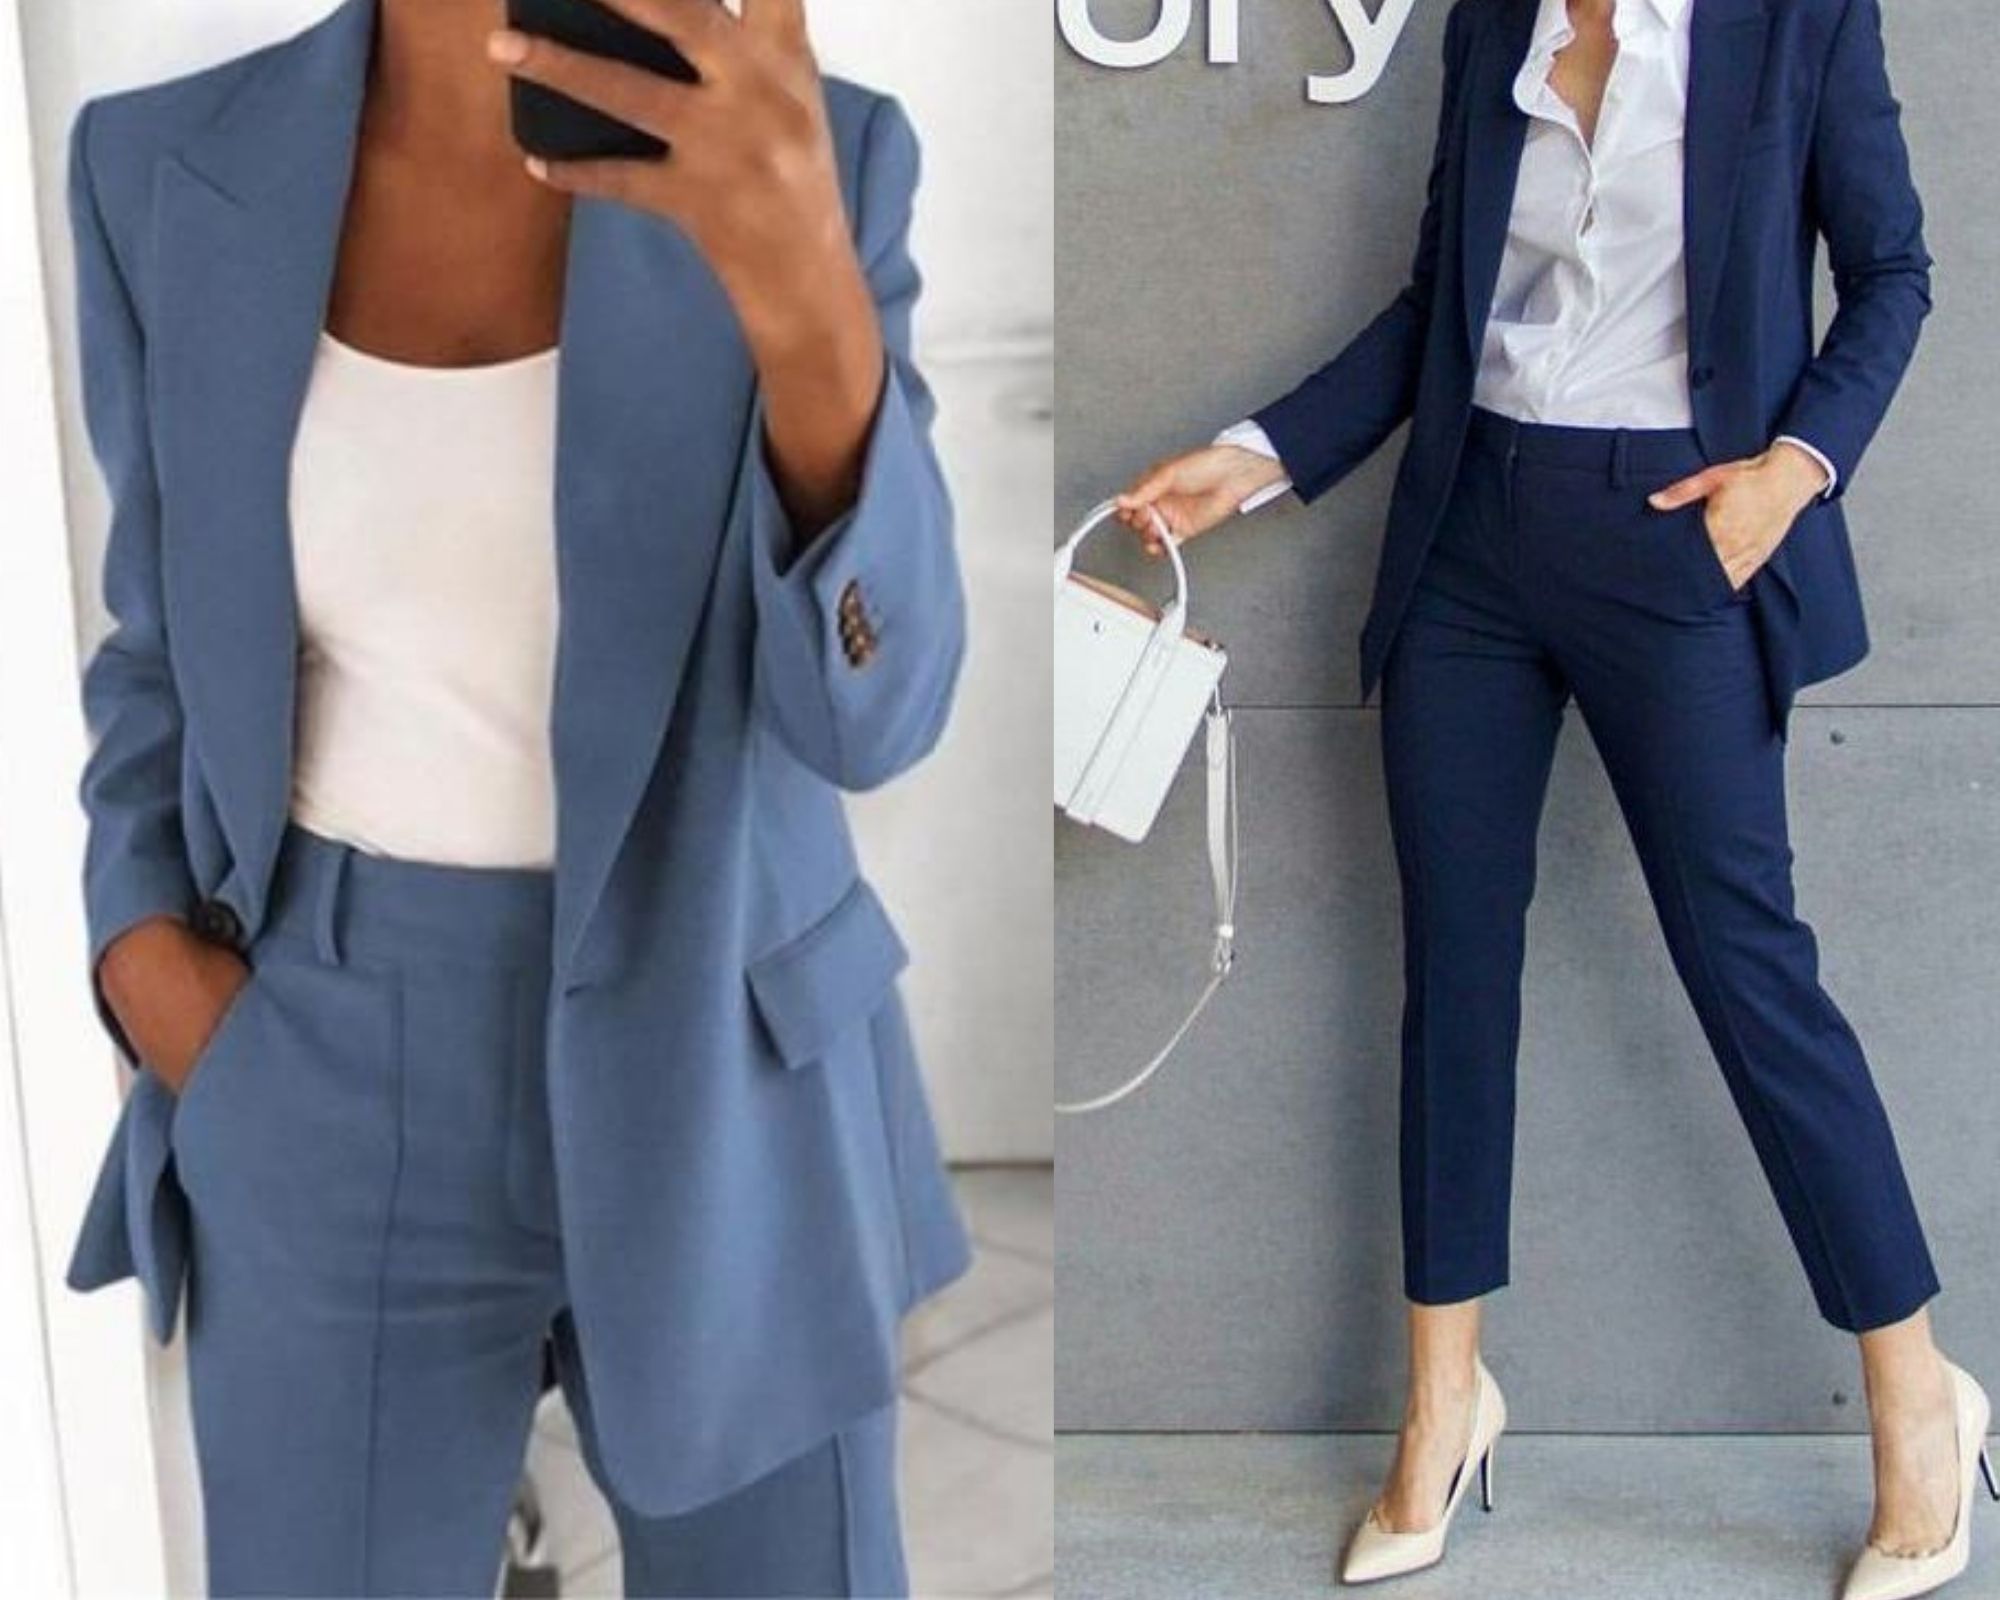 The Color Palette With Blue For The Capsule Wardrobe